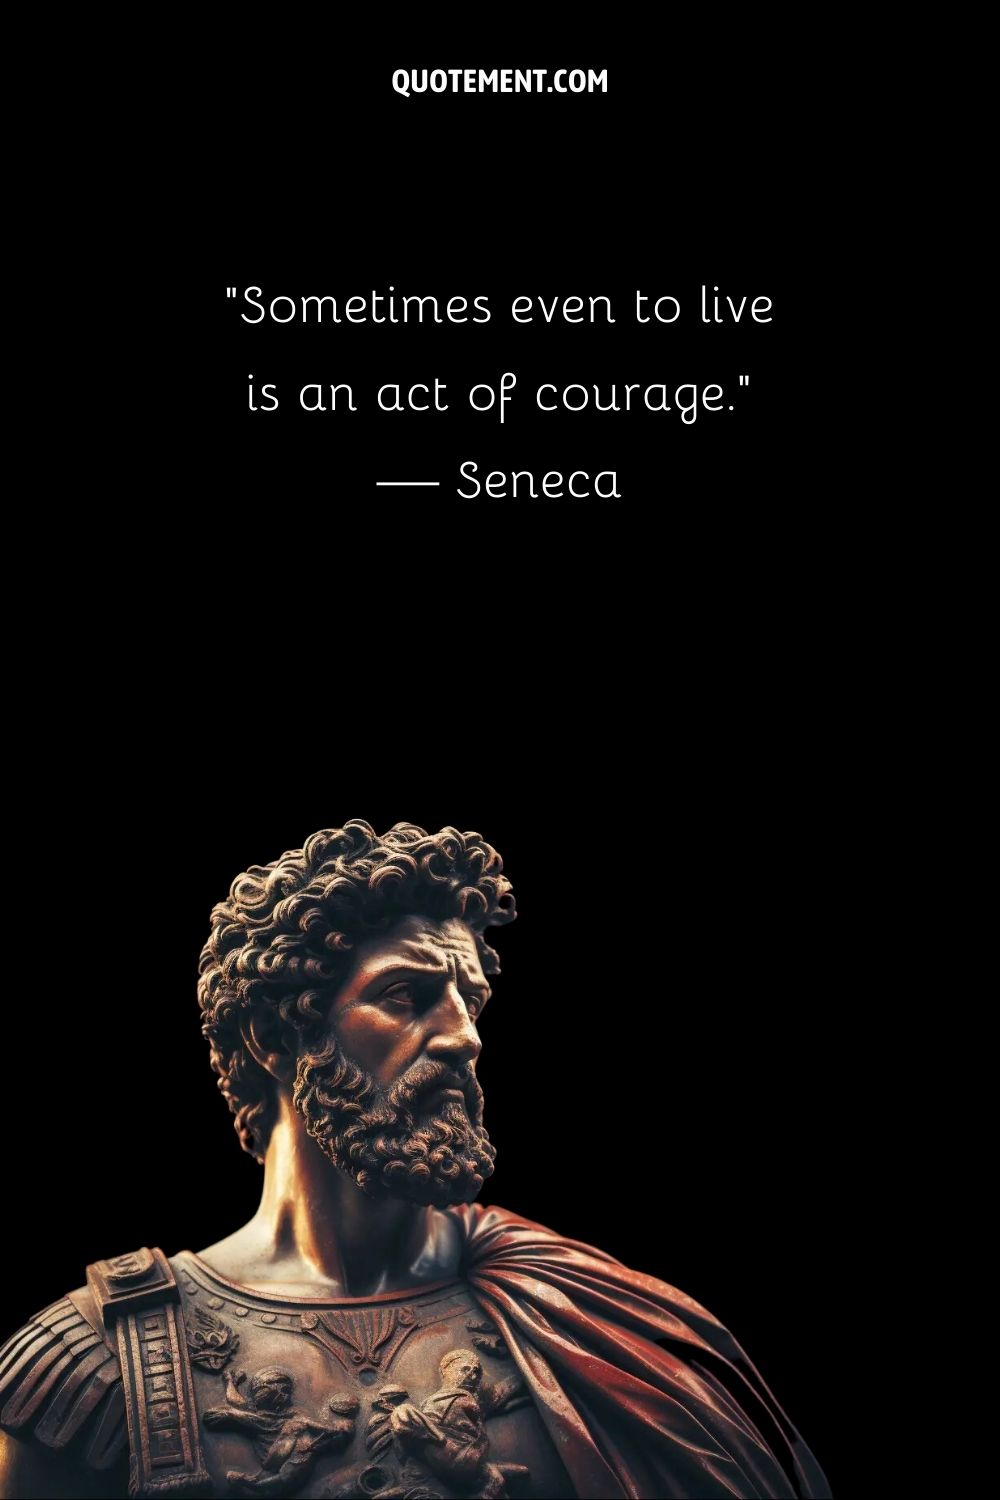 “Sometimes even to live is an act of courage.” — Seneca